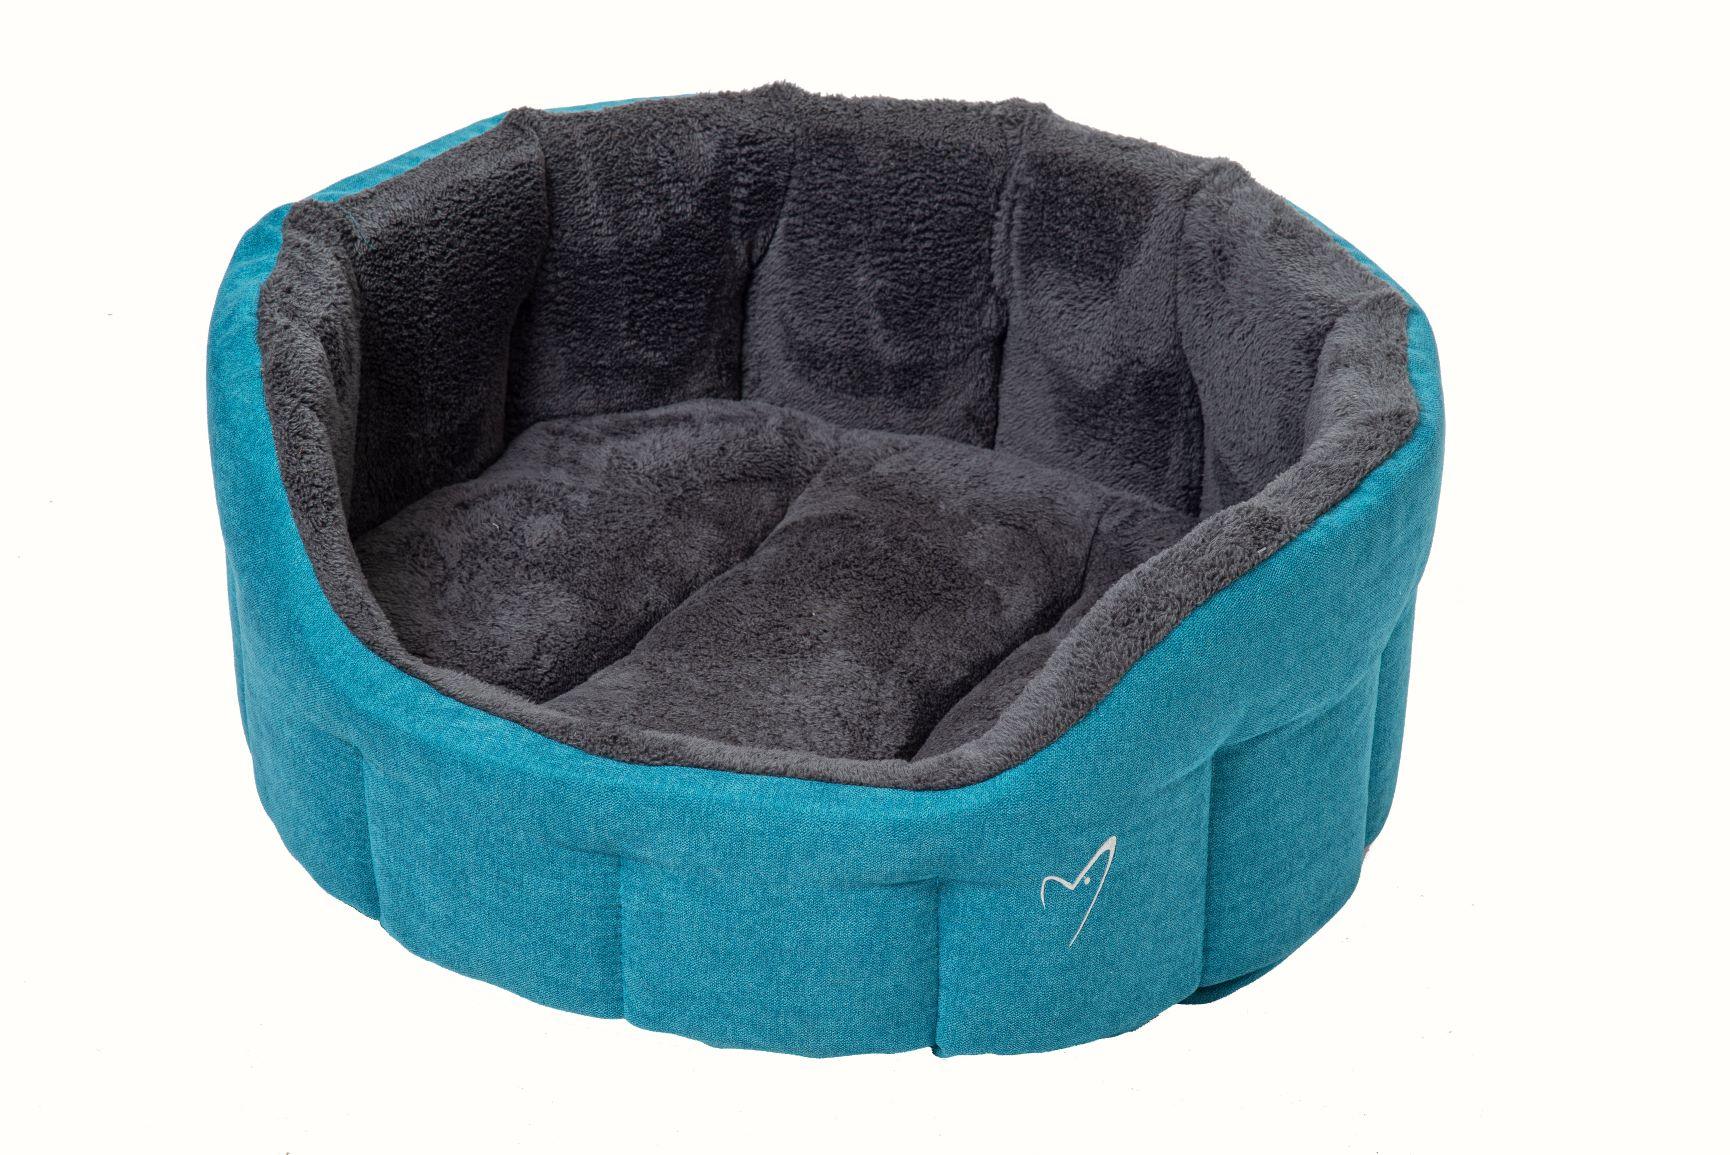 View Camden Deluxe Bed Teal Small 56cm 22 information